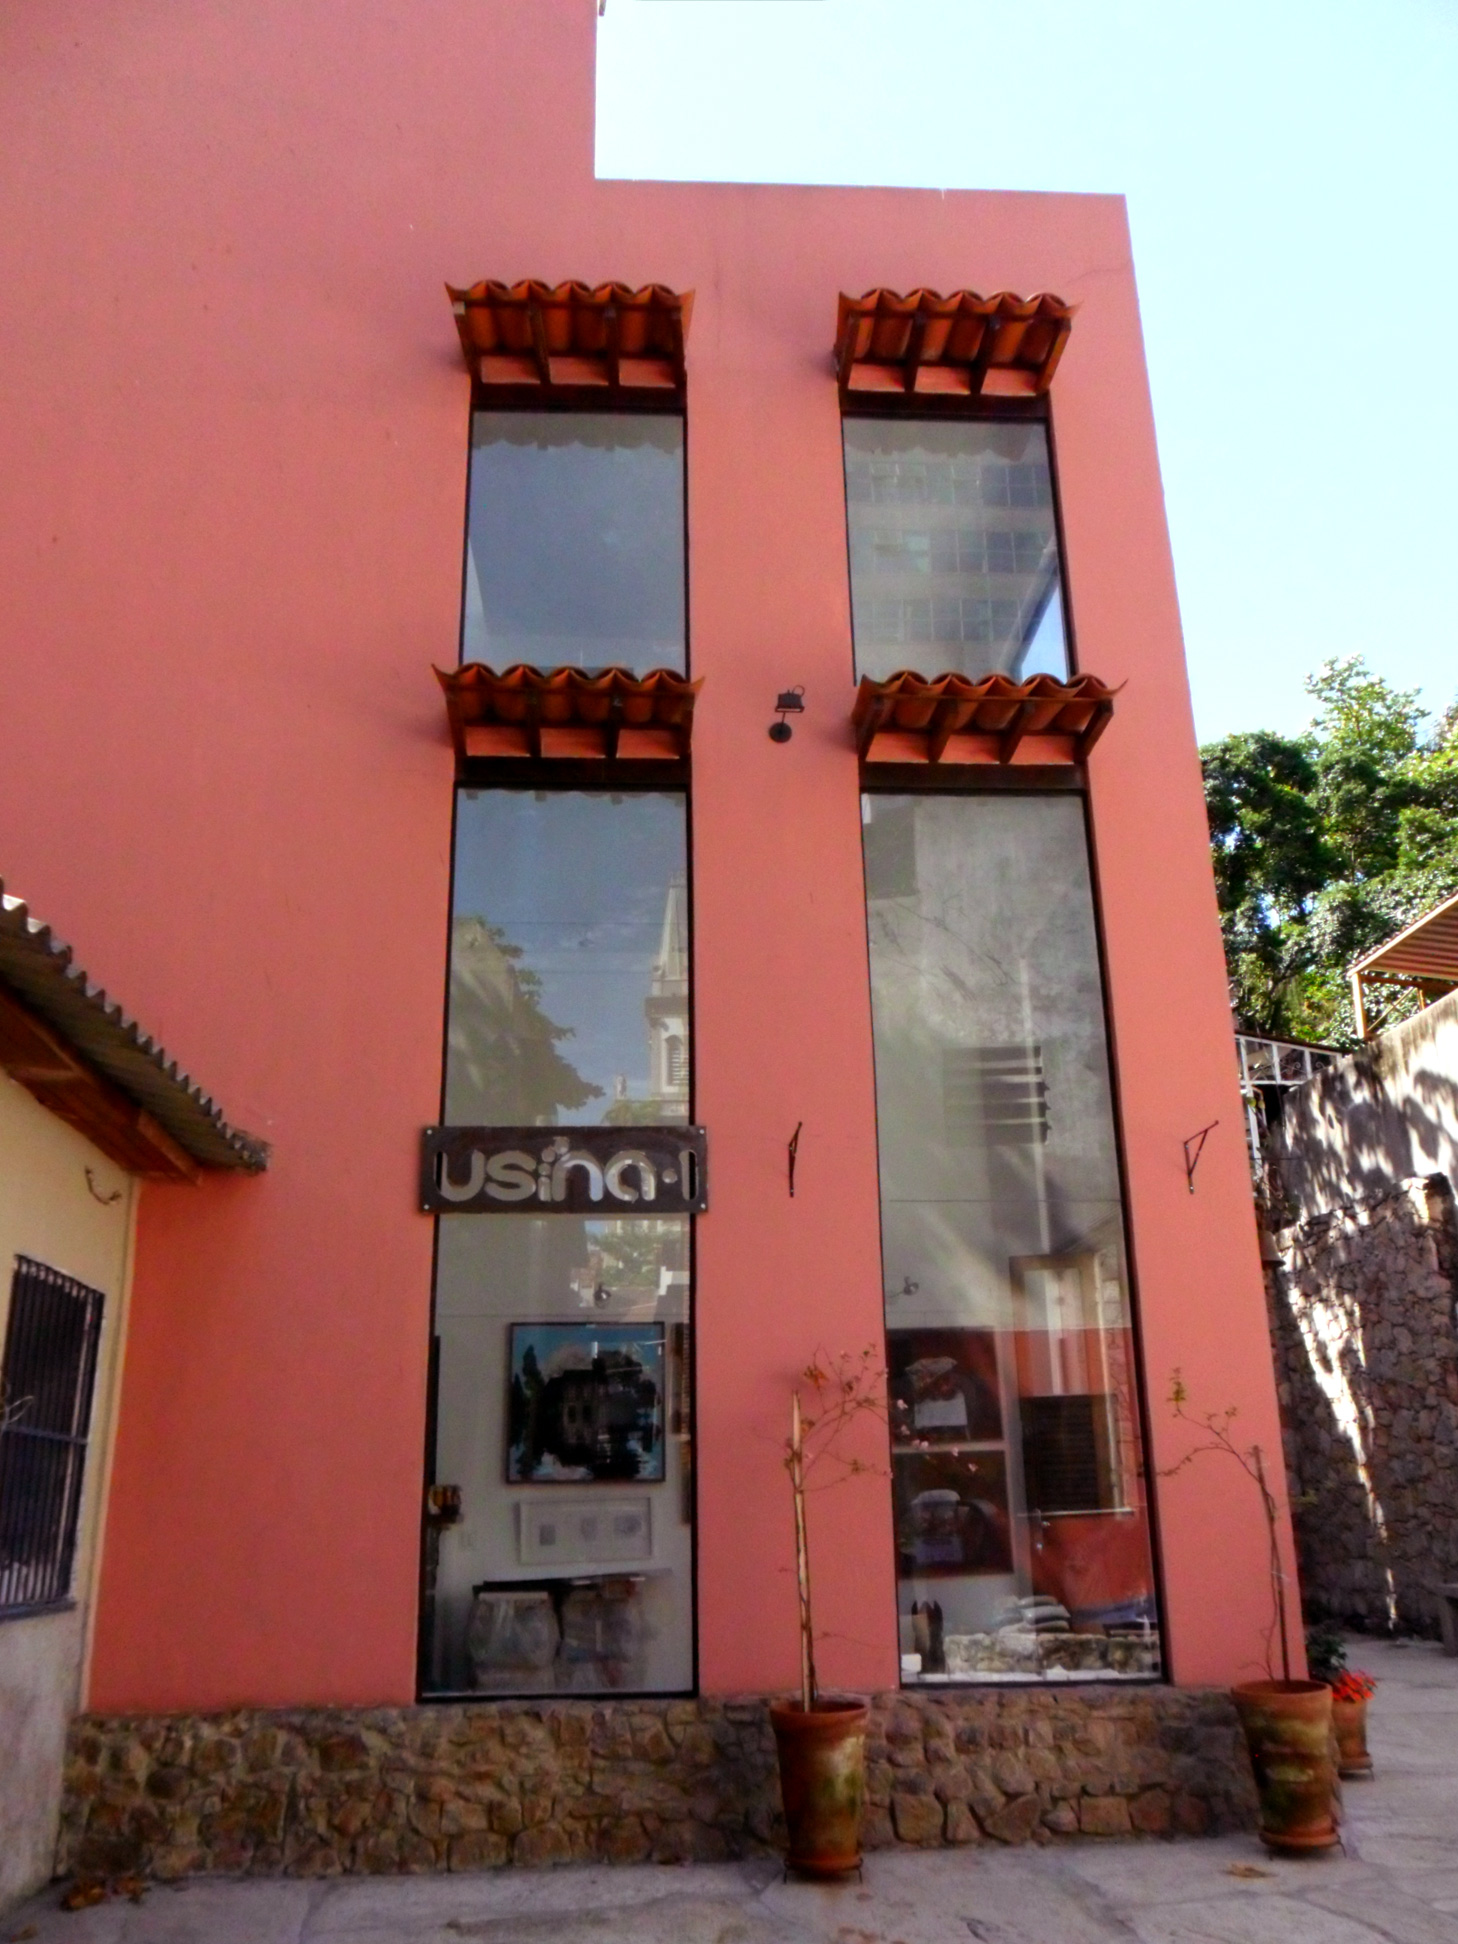 Usina, A Young Art Gallery Story in Rio